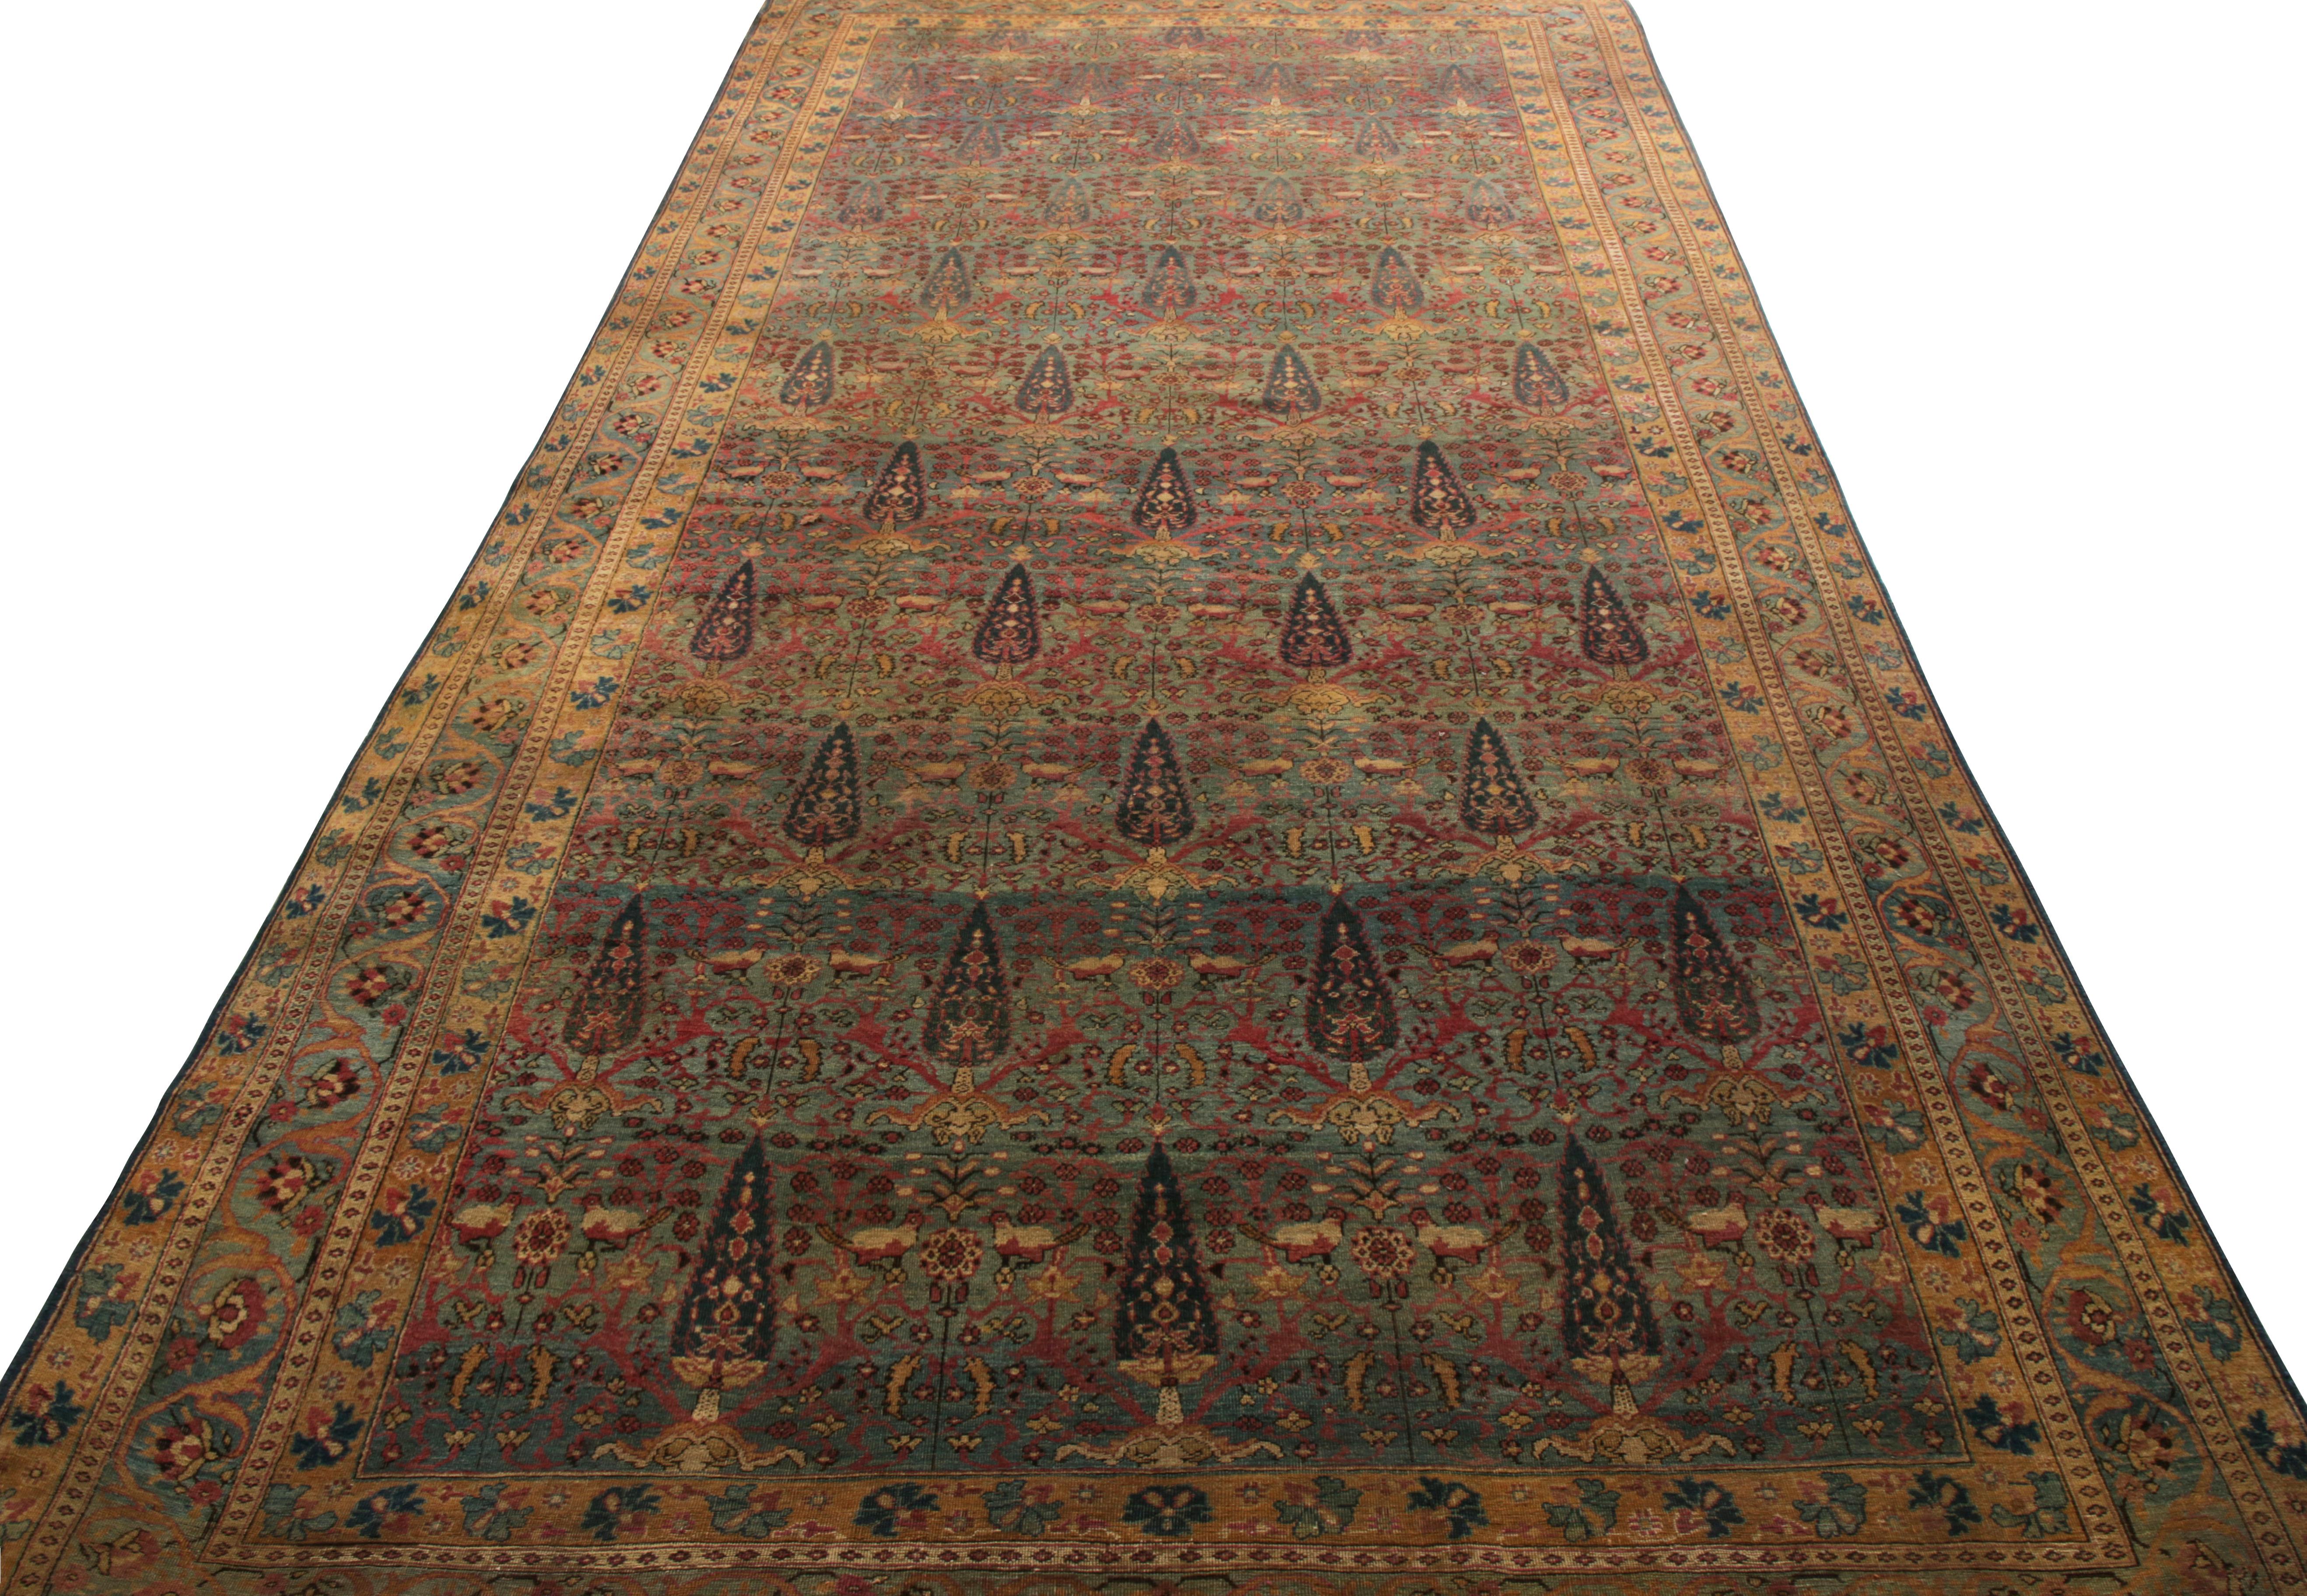 Hand knotted in wool circa 1920-1930, an antique Persian 7 x 14 Kerman Lavar rung joining Rug & Kilim’s Antique & Vintage Collection. This collectible enjoys a rich beige-brown and blue colourway with hints of pink on the field to accent a cypress